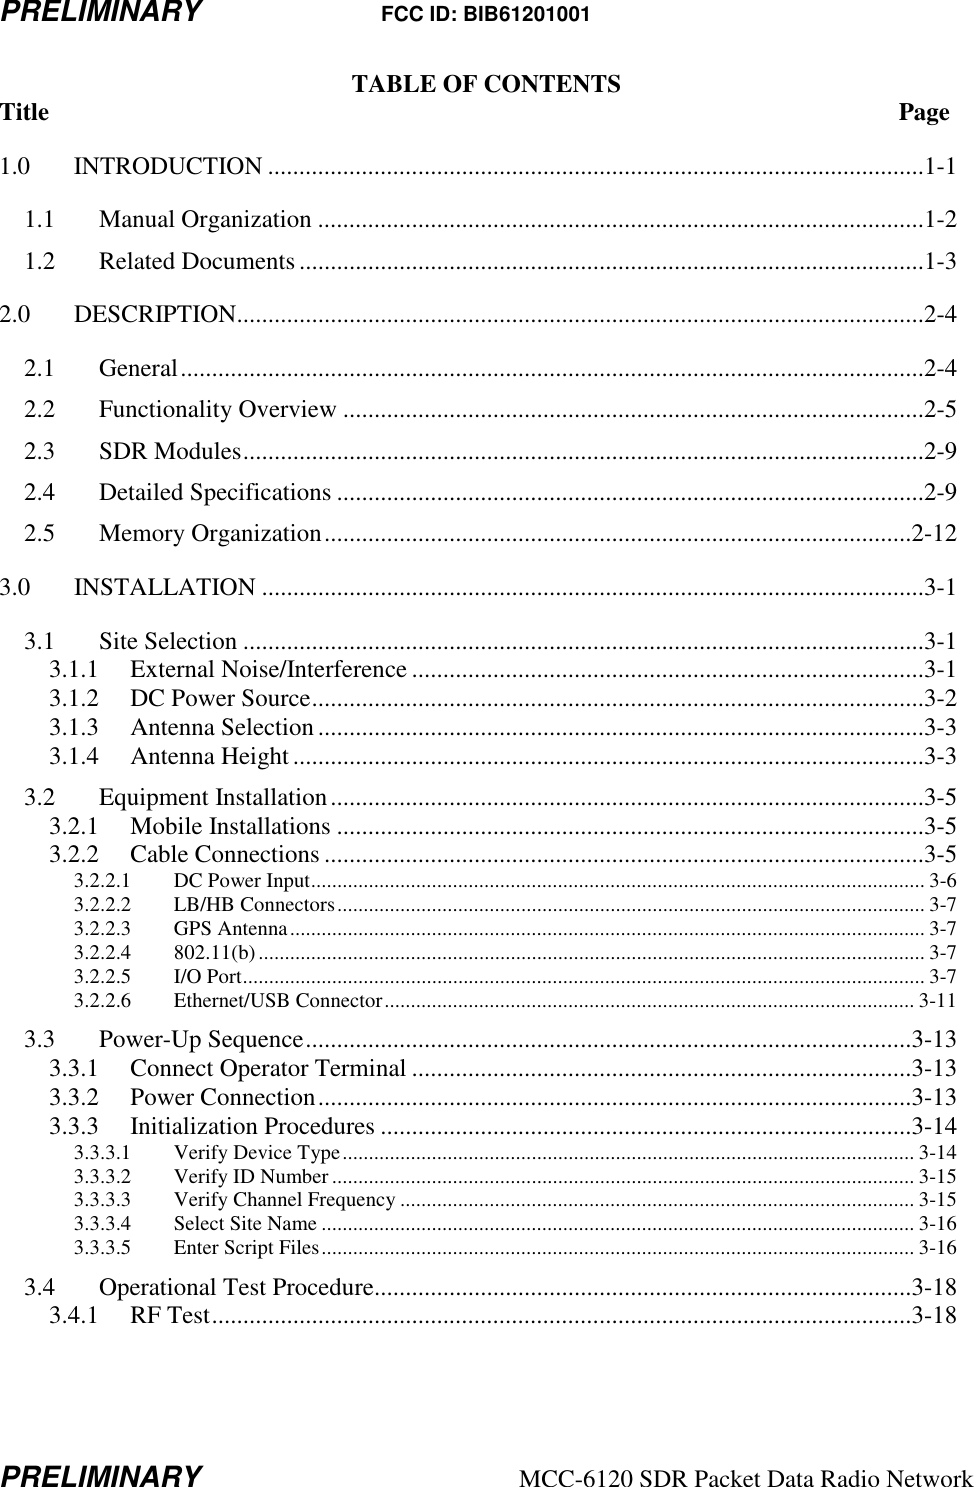 PRELIMINARY FCC ID: BIB61201001 PRELIMINARY  MCC-6120 SDR Packet Data Radio Network TABLE OF CONTENTS Title                         Page 1.0  INTRODUCTION .........................................................................................................1-1 1.1  Manual Organization .................................................................................................1-2 1.2  Related Documents....................................................................................................1-3 2.0  DESCRIPTION..............................................................................................................2-4 2.1  General.......................................................................................................................2-4 2.2  Functionality Overview .............................................................................................2-5 2.3  SDR Modules.............................................................................................................2-9 2.4  Detailed Specifications ..............................................................................................2-9 2.5  Memory Organization..............................................................................................2-12 3.0  INSTALLATION ..........................................................................................................3-1 3.1  Site Selection .............................................................................................................3-1 3.1.1  External Noise/Interference ..................................................................................3-1 3.1.2  DC Power Source..................................................................................................3-2 3.1.3  Antenna Selection.................................................................................................3-3 3.1.4  Antenna Height.....................................................................................................3-3 3.2  Equipment Installation...............................................................................................3-5 3.2.1  Mobile Installations ..............................................................................................3-5 3.2.2  Cable Connections ................................................................................................3-5 3.2.2.1 DC Power Input..................................................................................................................... 3-6 3.2.2.2 LB/HB Connectors................................................................................................................ 3-7 3.2.2.3 GPS Antenna......................................................................................................................... 3-7 3.2.2.4 802.11(b)............................................................................................................................... 3-7 3.2.2.5 I/O Port.................................................................................................................................. 3-7 3.2.2.6 Ethernet/USB Connector..................................................................................................... 3-11 3.3  Power-Up Sequence.................................................................................................3-13 3.3.1  Connect Operator Terminal ................................................................................3-13 3.3.2  Power Connection...............................................................................................3-13 3.3.3  Initialization Procedures .....................................................................................3-14 3.3.3.1 Verify Device Type............................................................................................................. 3-14 3.3.3.2 Verify ID Number ............................................................................................................... 3-15 3.3.3.3 Verify Channel Frequency .................................................................................................. 3-15 3.3.3.4 Select Site Name ................................................................................................................. 3-16 3.3.3.5 Enter Script Files................................................................................................................. 3-16 3.4  Operational Test Procedure......................................................................................3-18 3.4.1  RF Test................................................................................................................3-18    